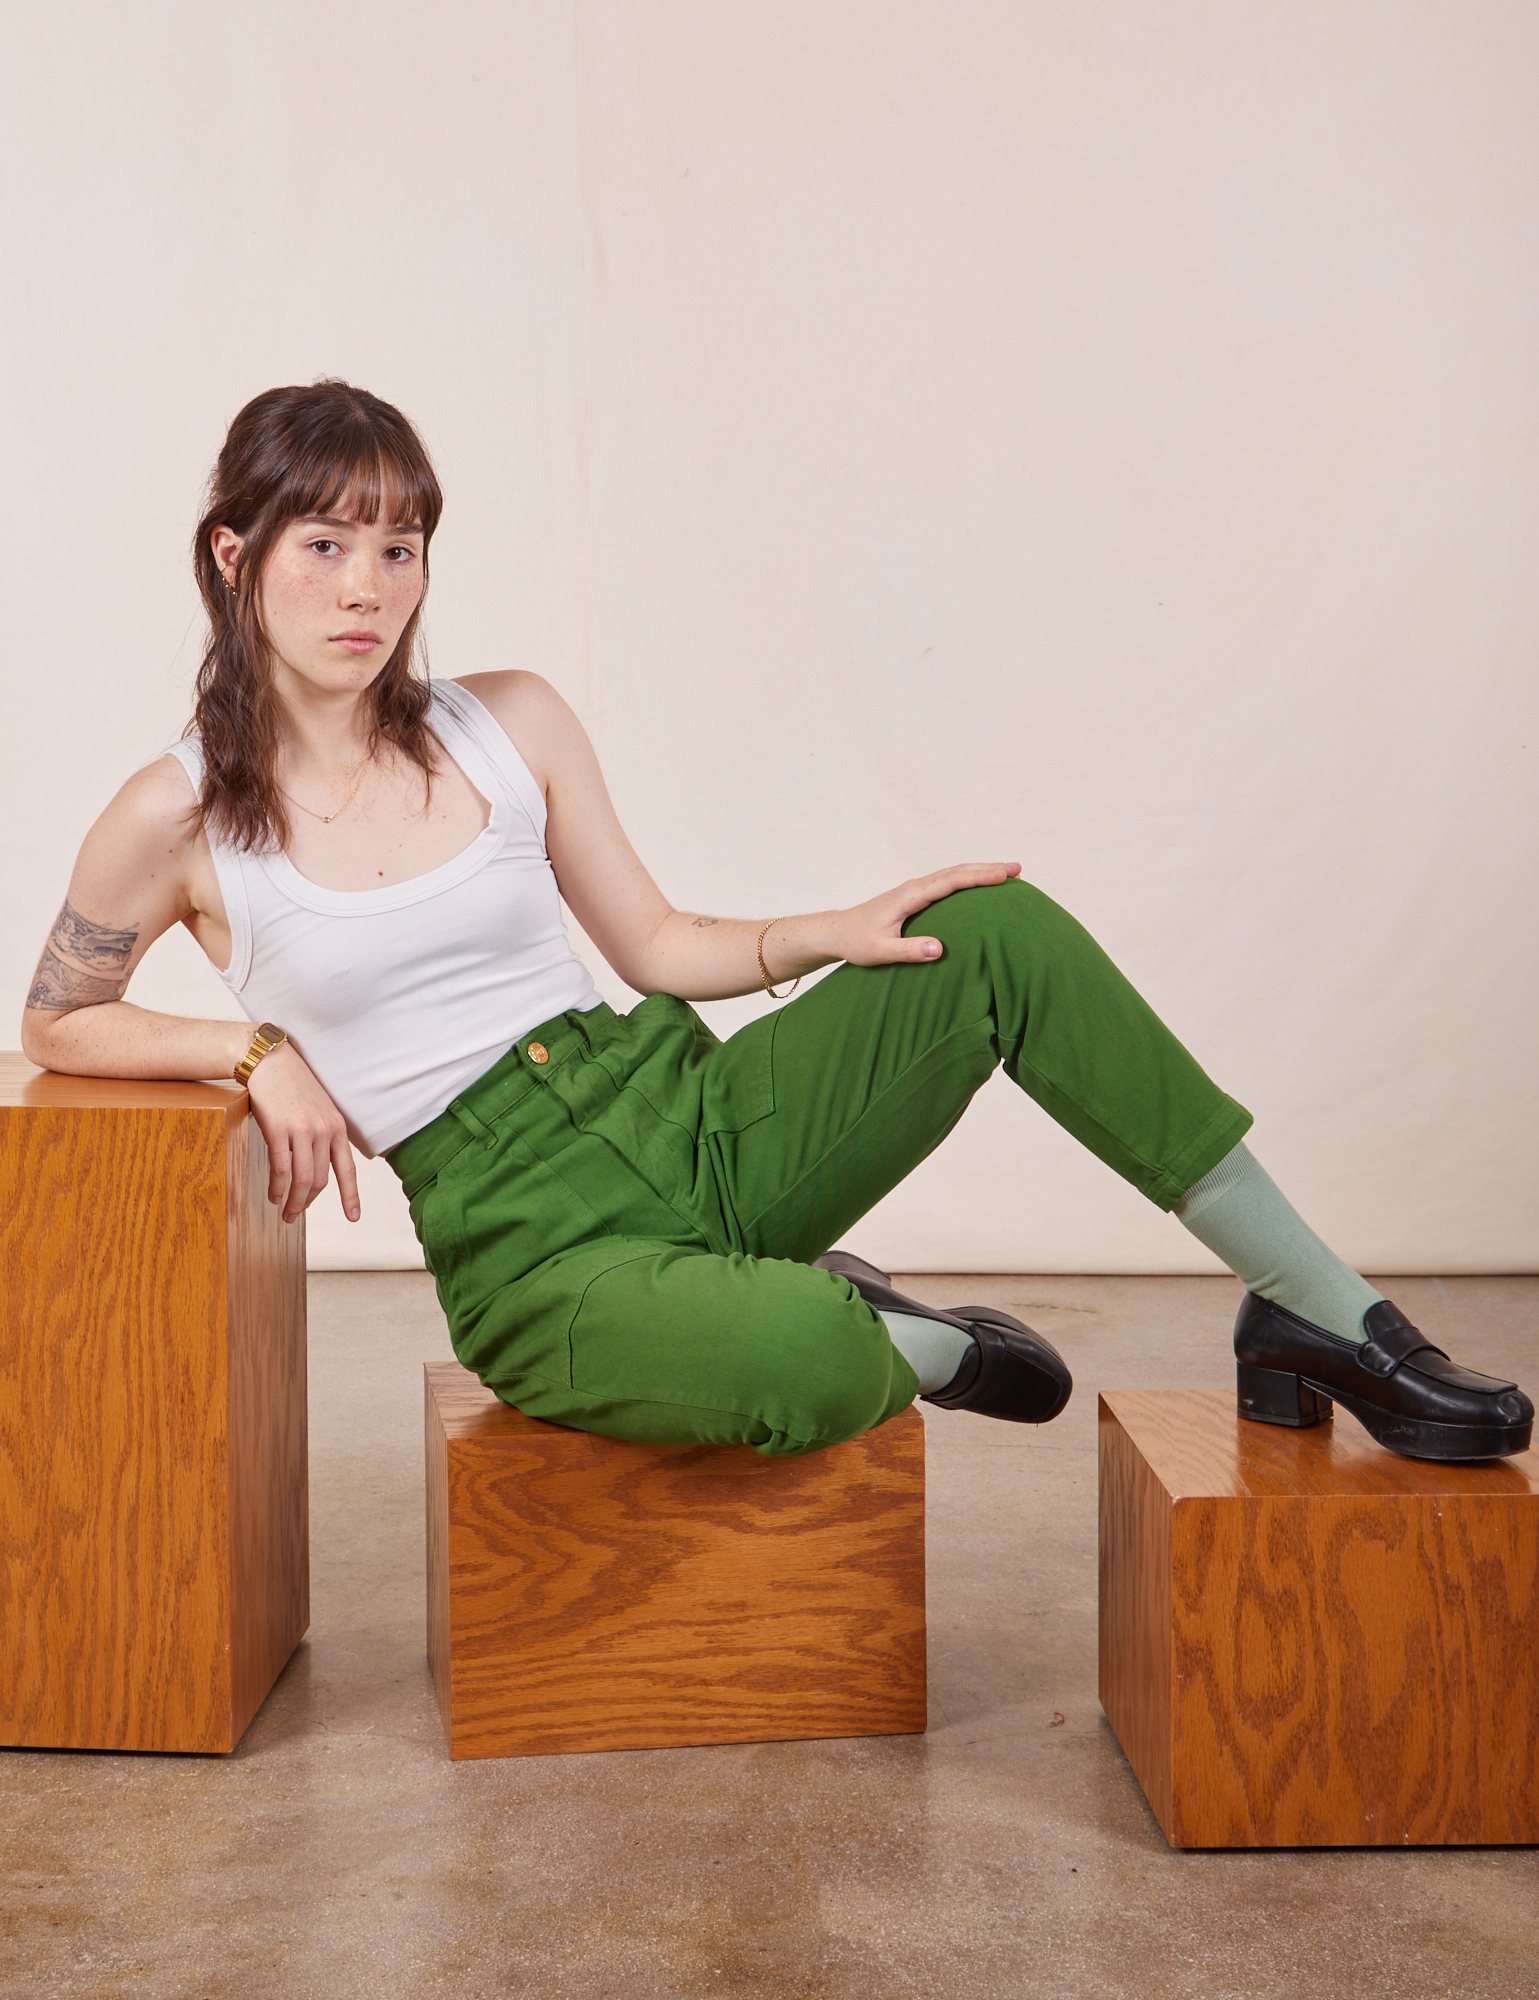 Hana is wearing Petite Pencil Pants in Lawn Green and vintage off-white Cropped Tank Top